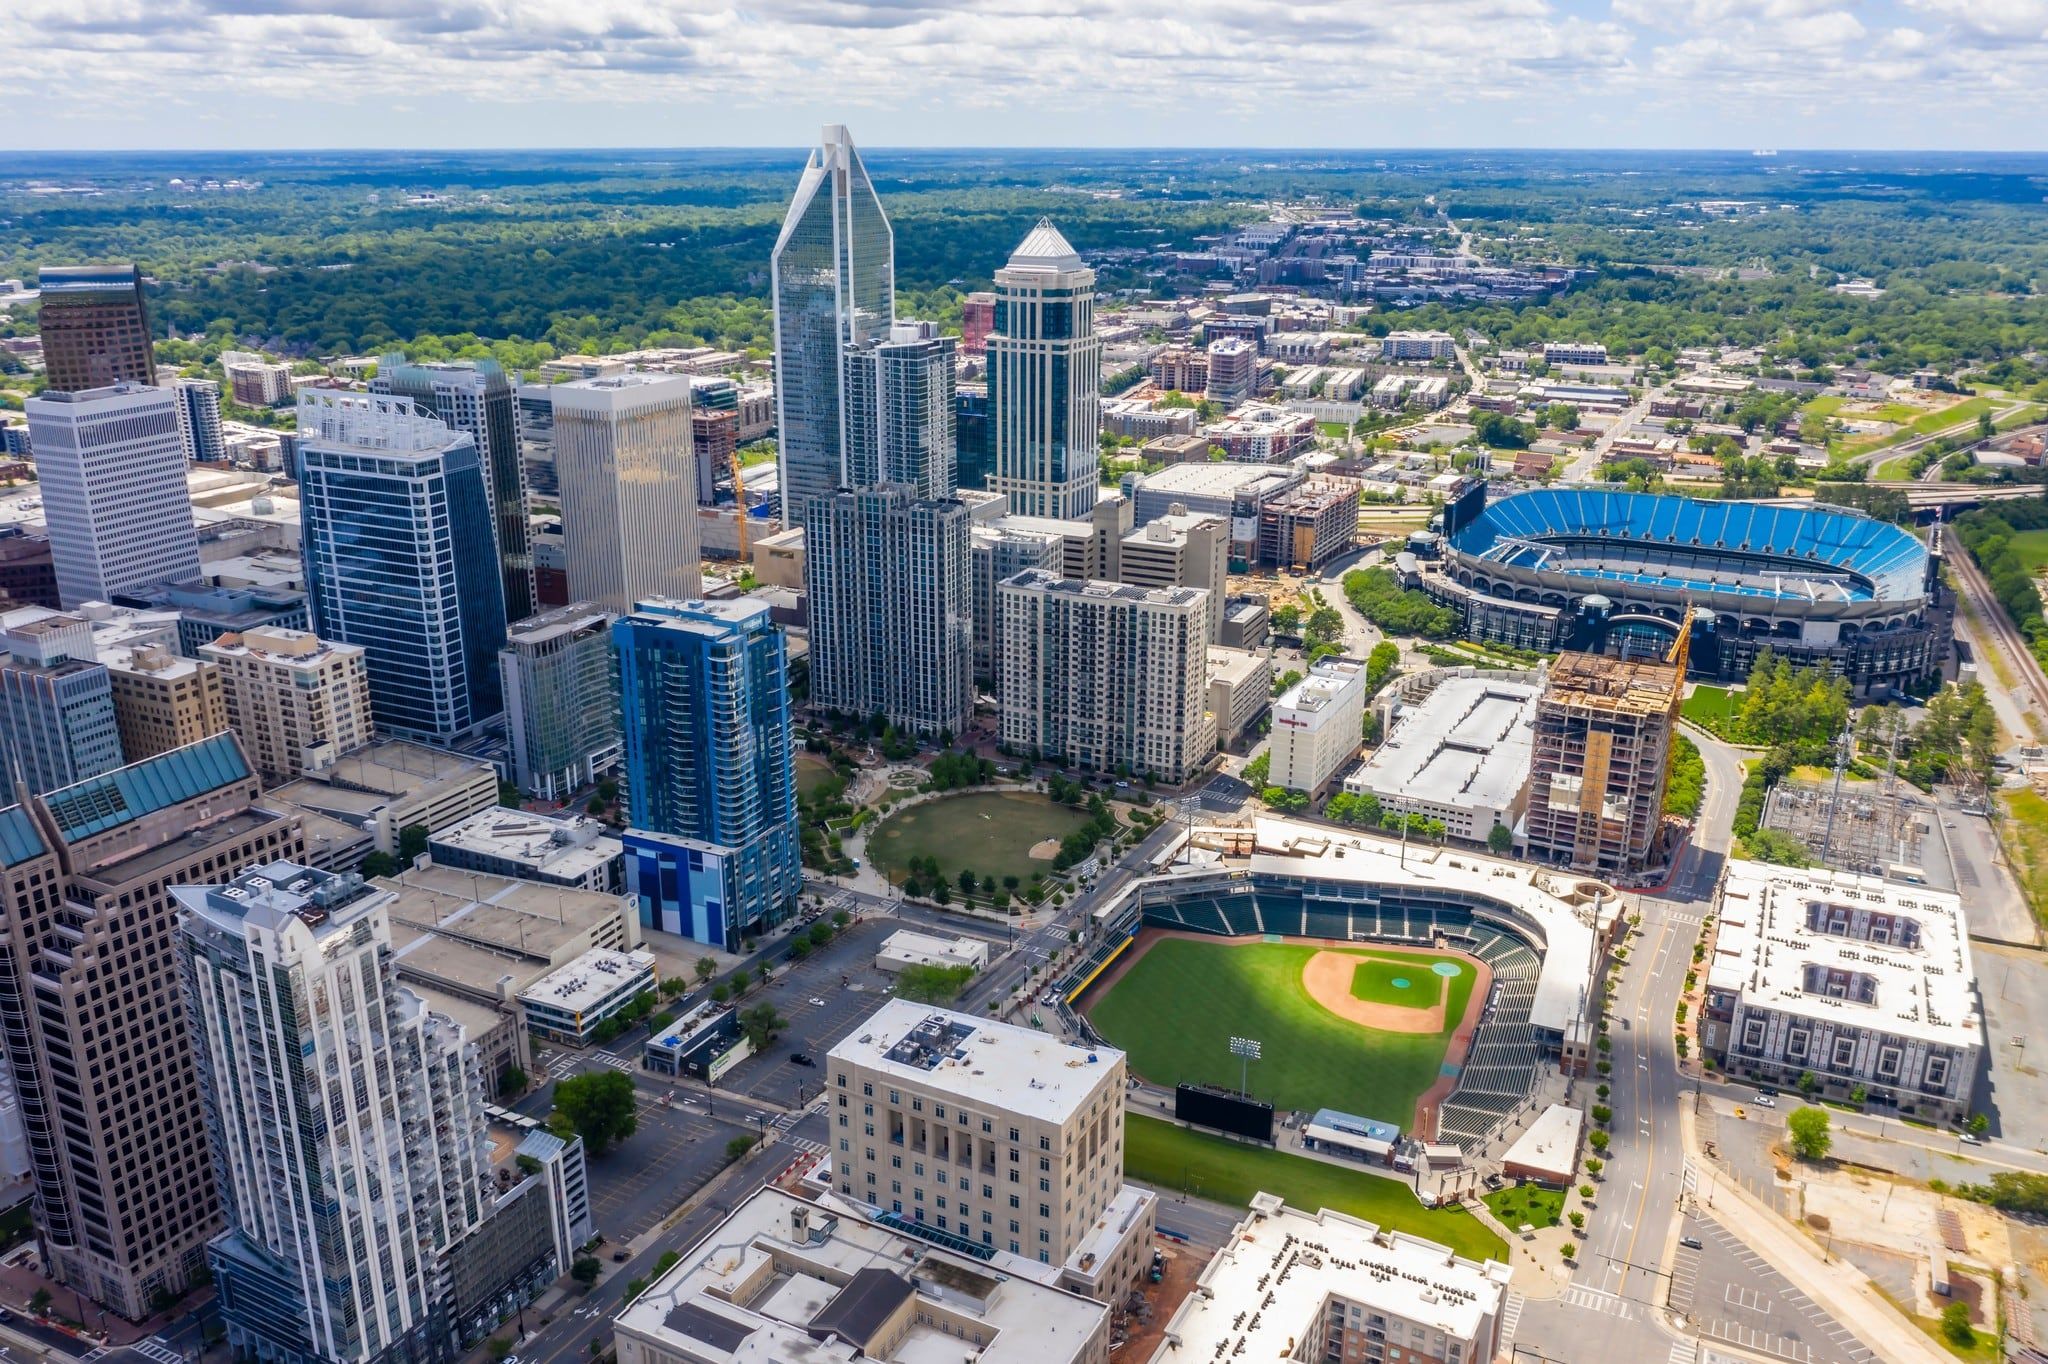 Aerial Views Of The City Of Charlotte, NC